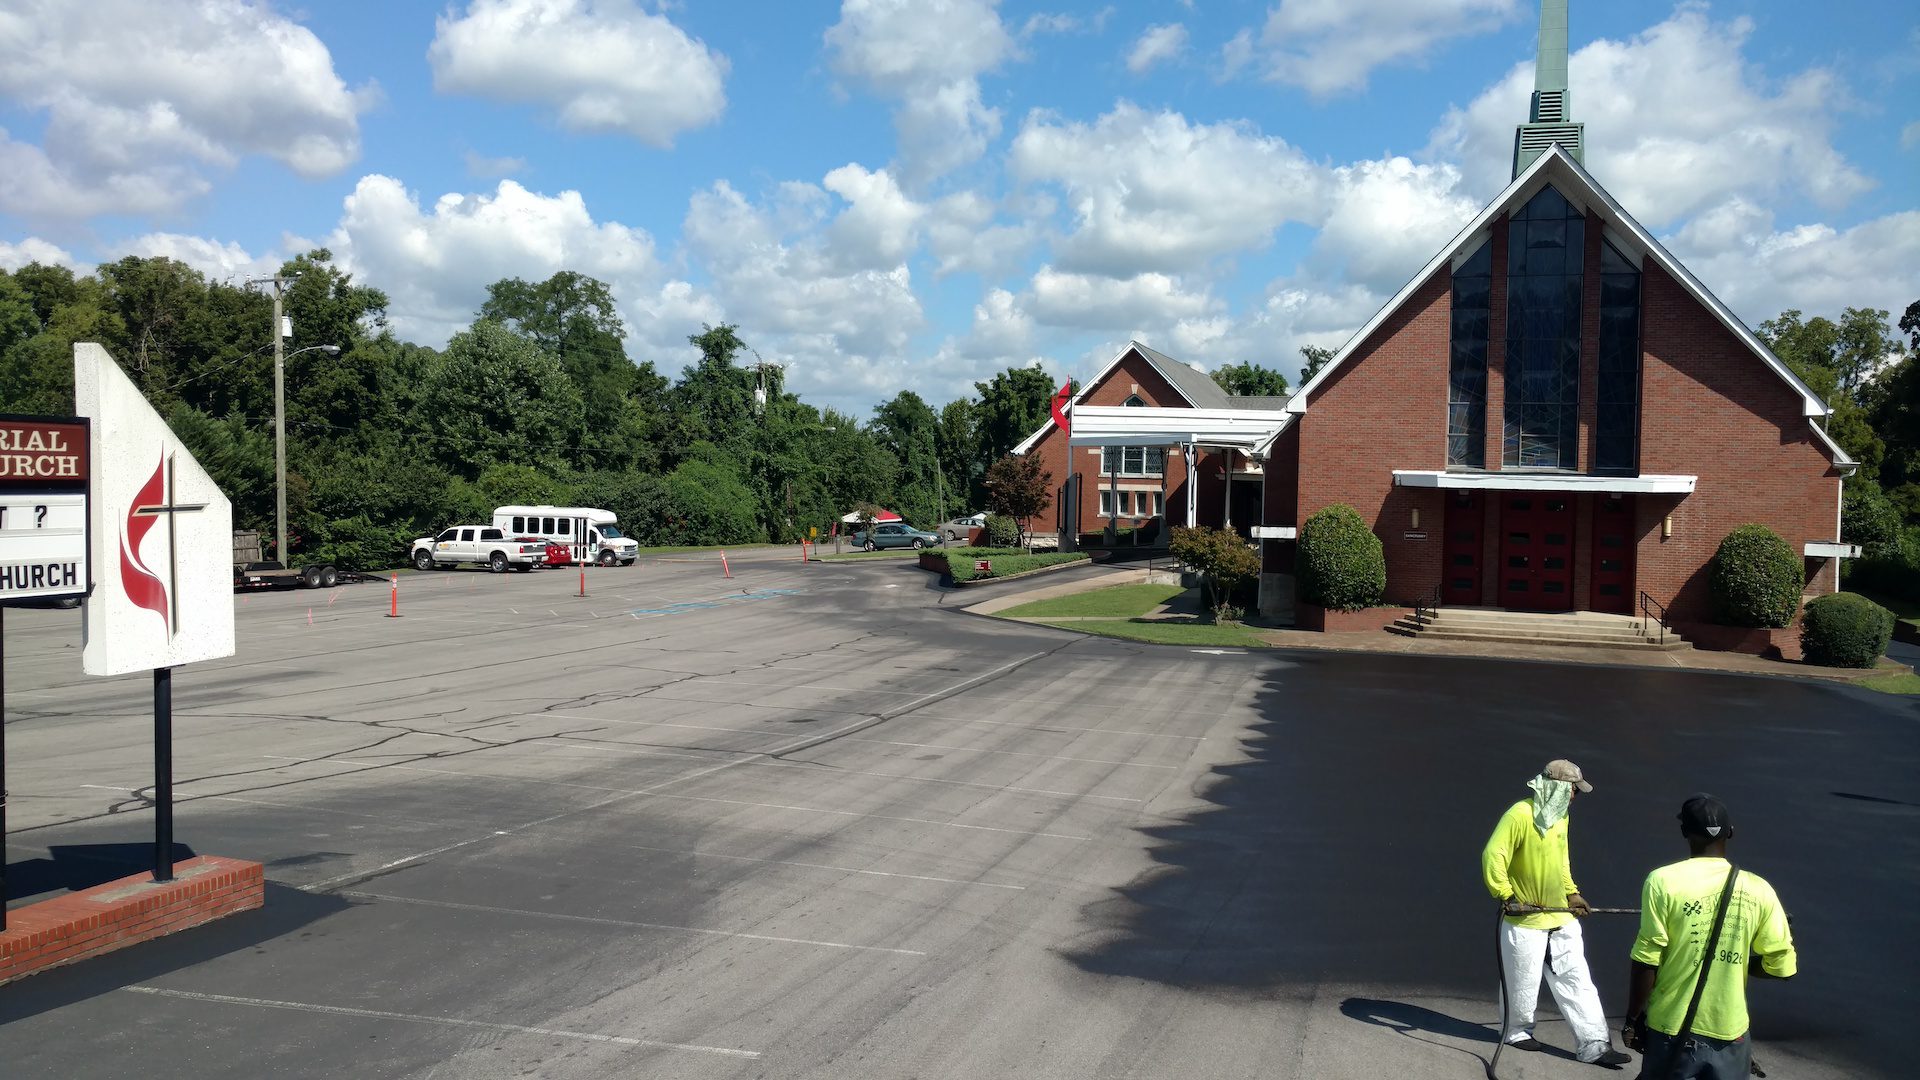 Church project included asphalt paving, asphalt parking lot repairs, parking lot maintenance, sealcoating, and parking lot striping.